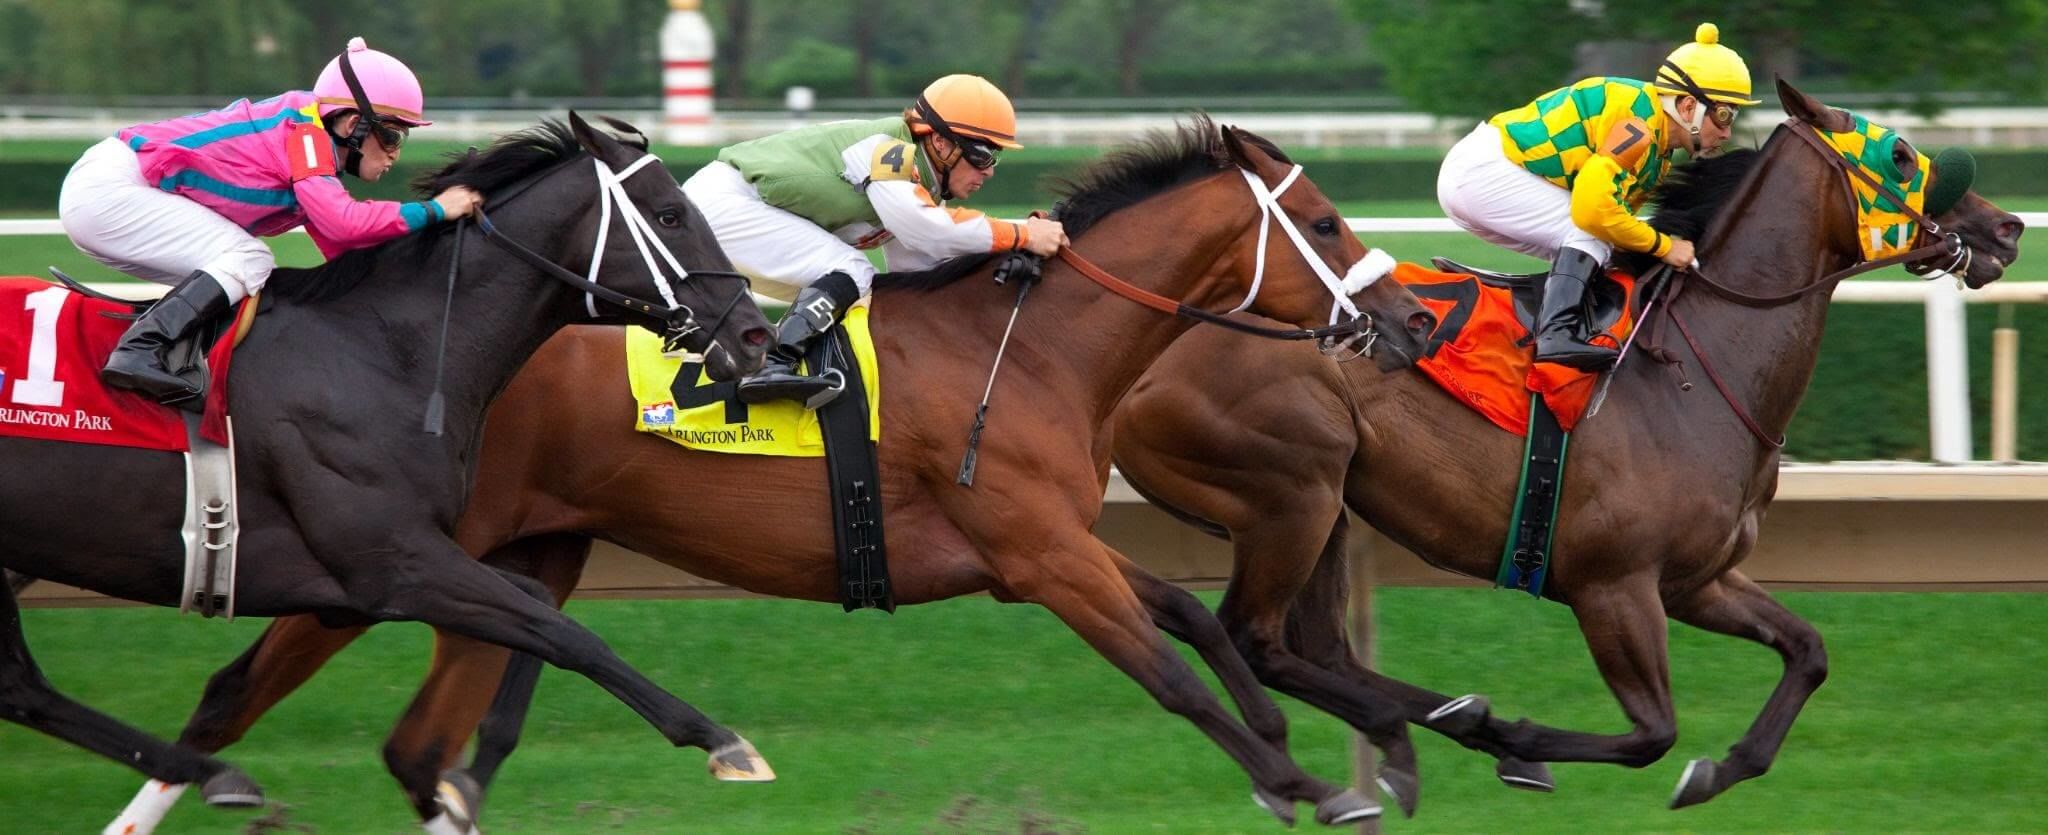 us horse betting sites